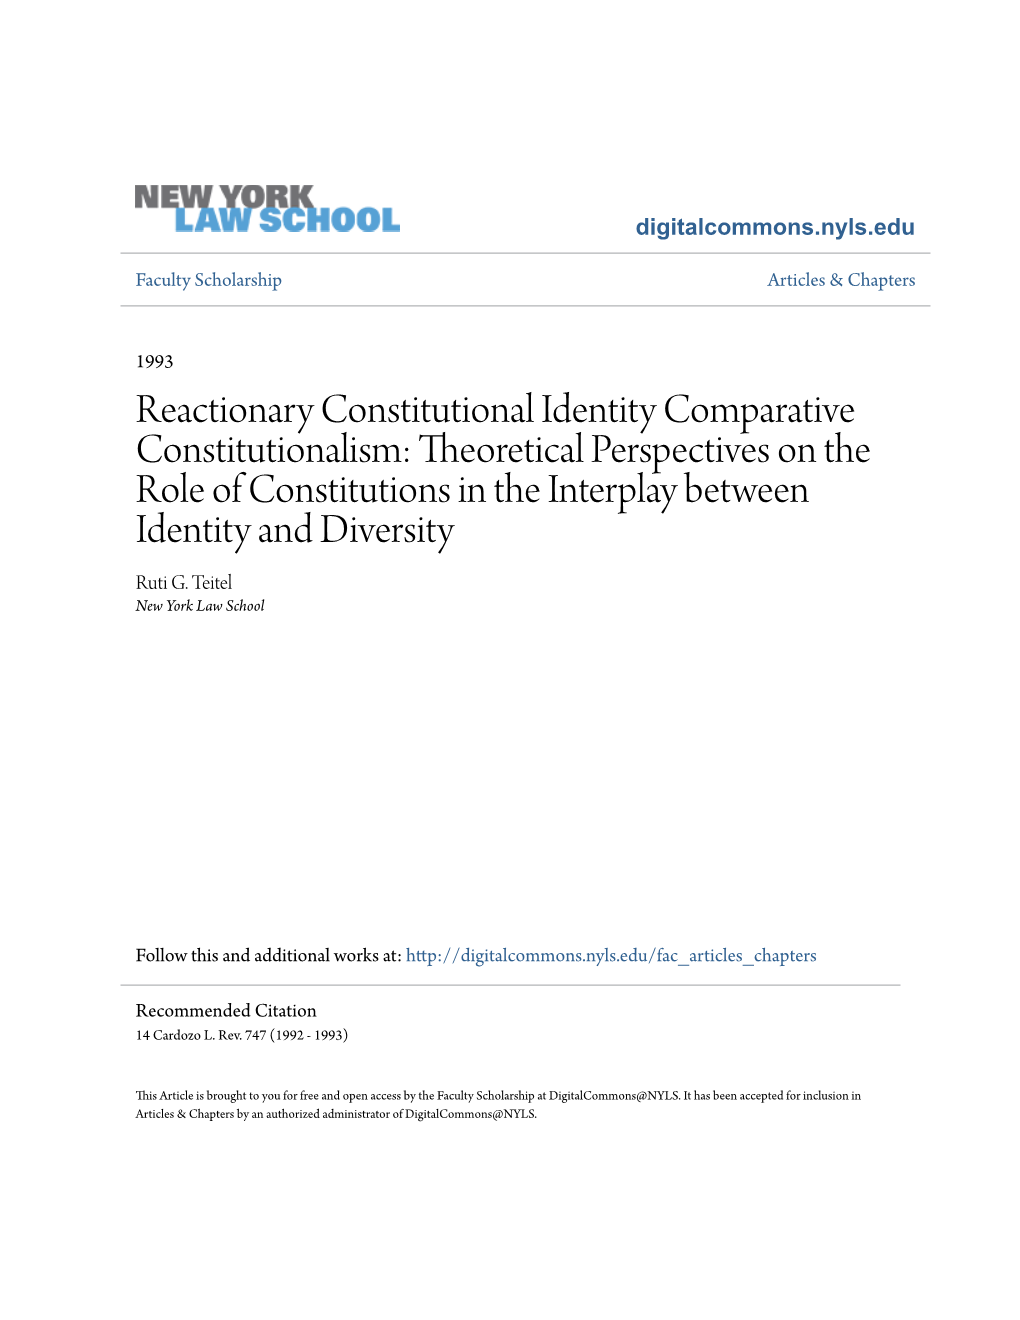 Reactionary Constitutional Identity Comparative Constitutionalism: Theoretical Perspectives on the Role of Constitutions In